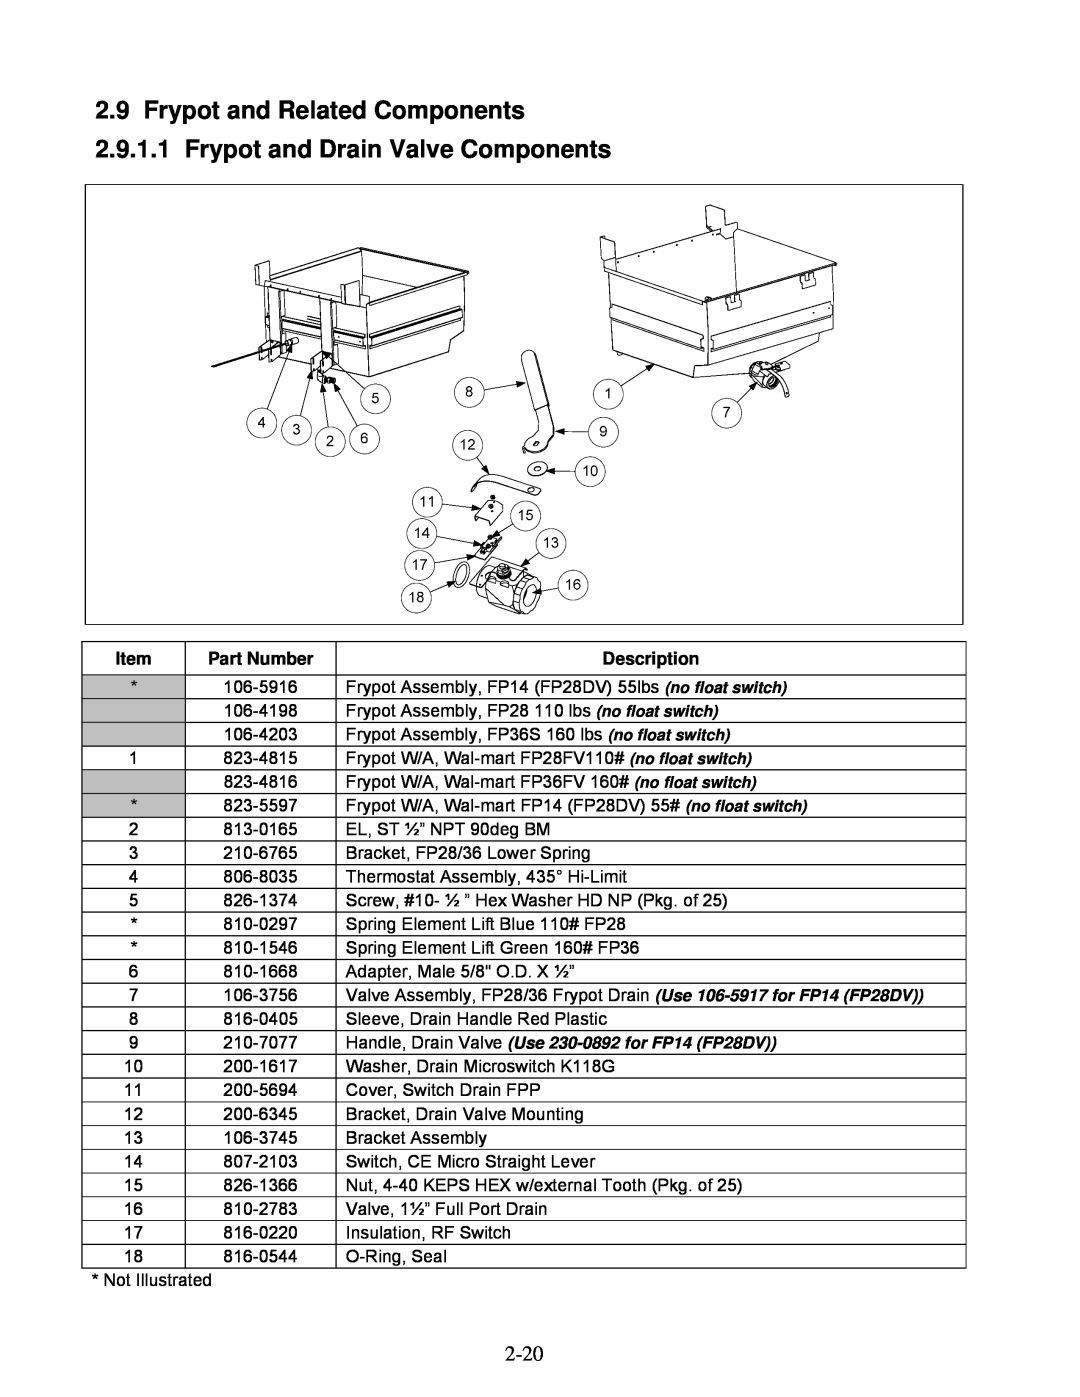 Frymaster 2836 manual Frypot and Related Components, Frypot and Drain Valve Components, Part Number, Description 